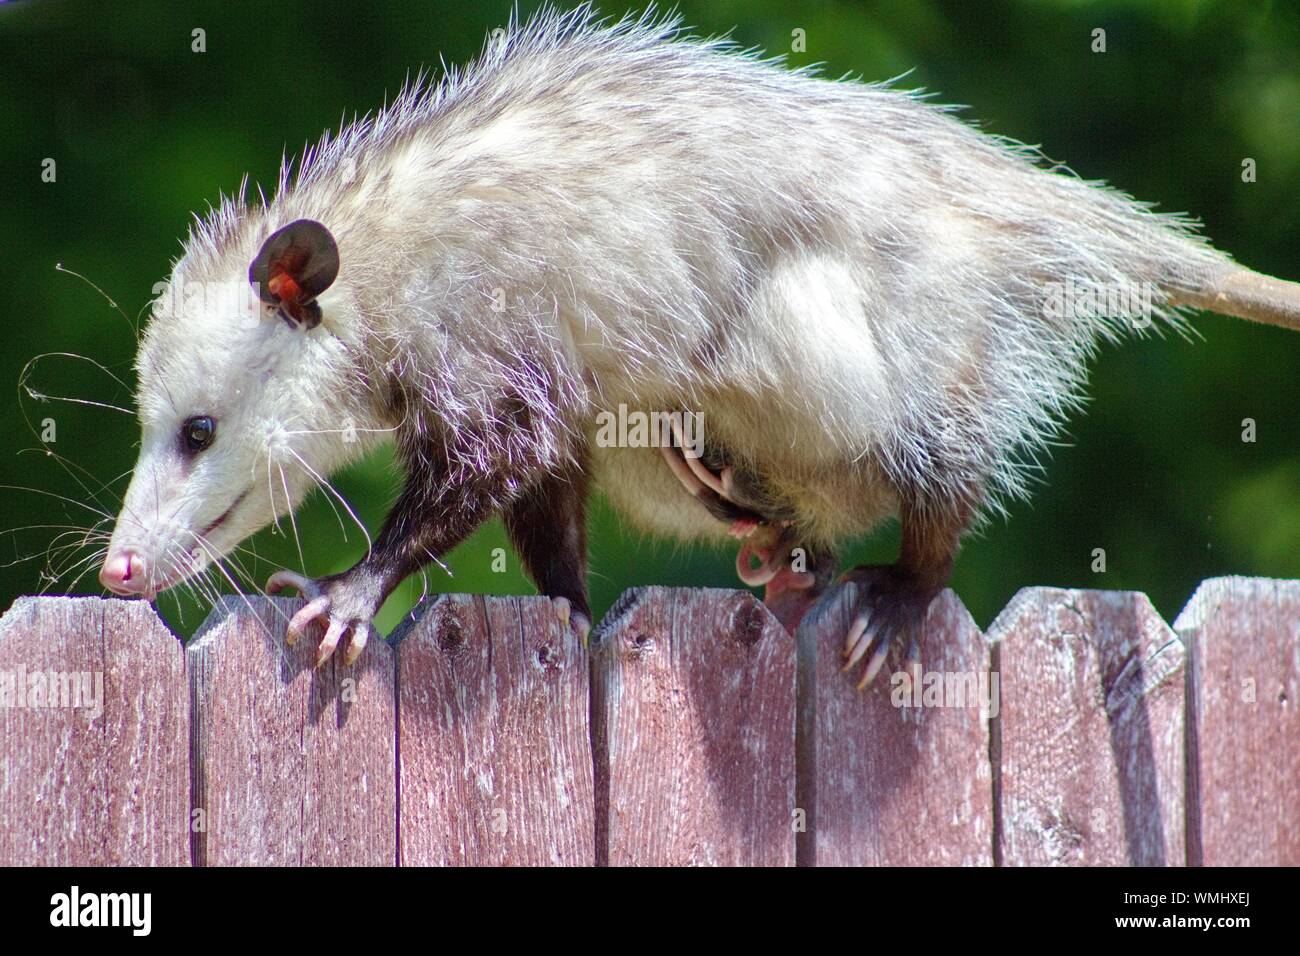 Close-up Of Possum Walking On Wooden Fence Stock Photo